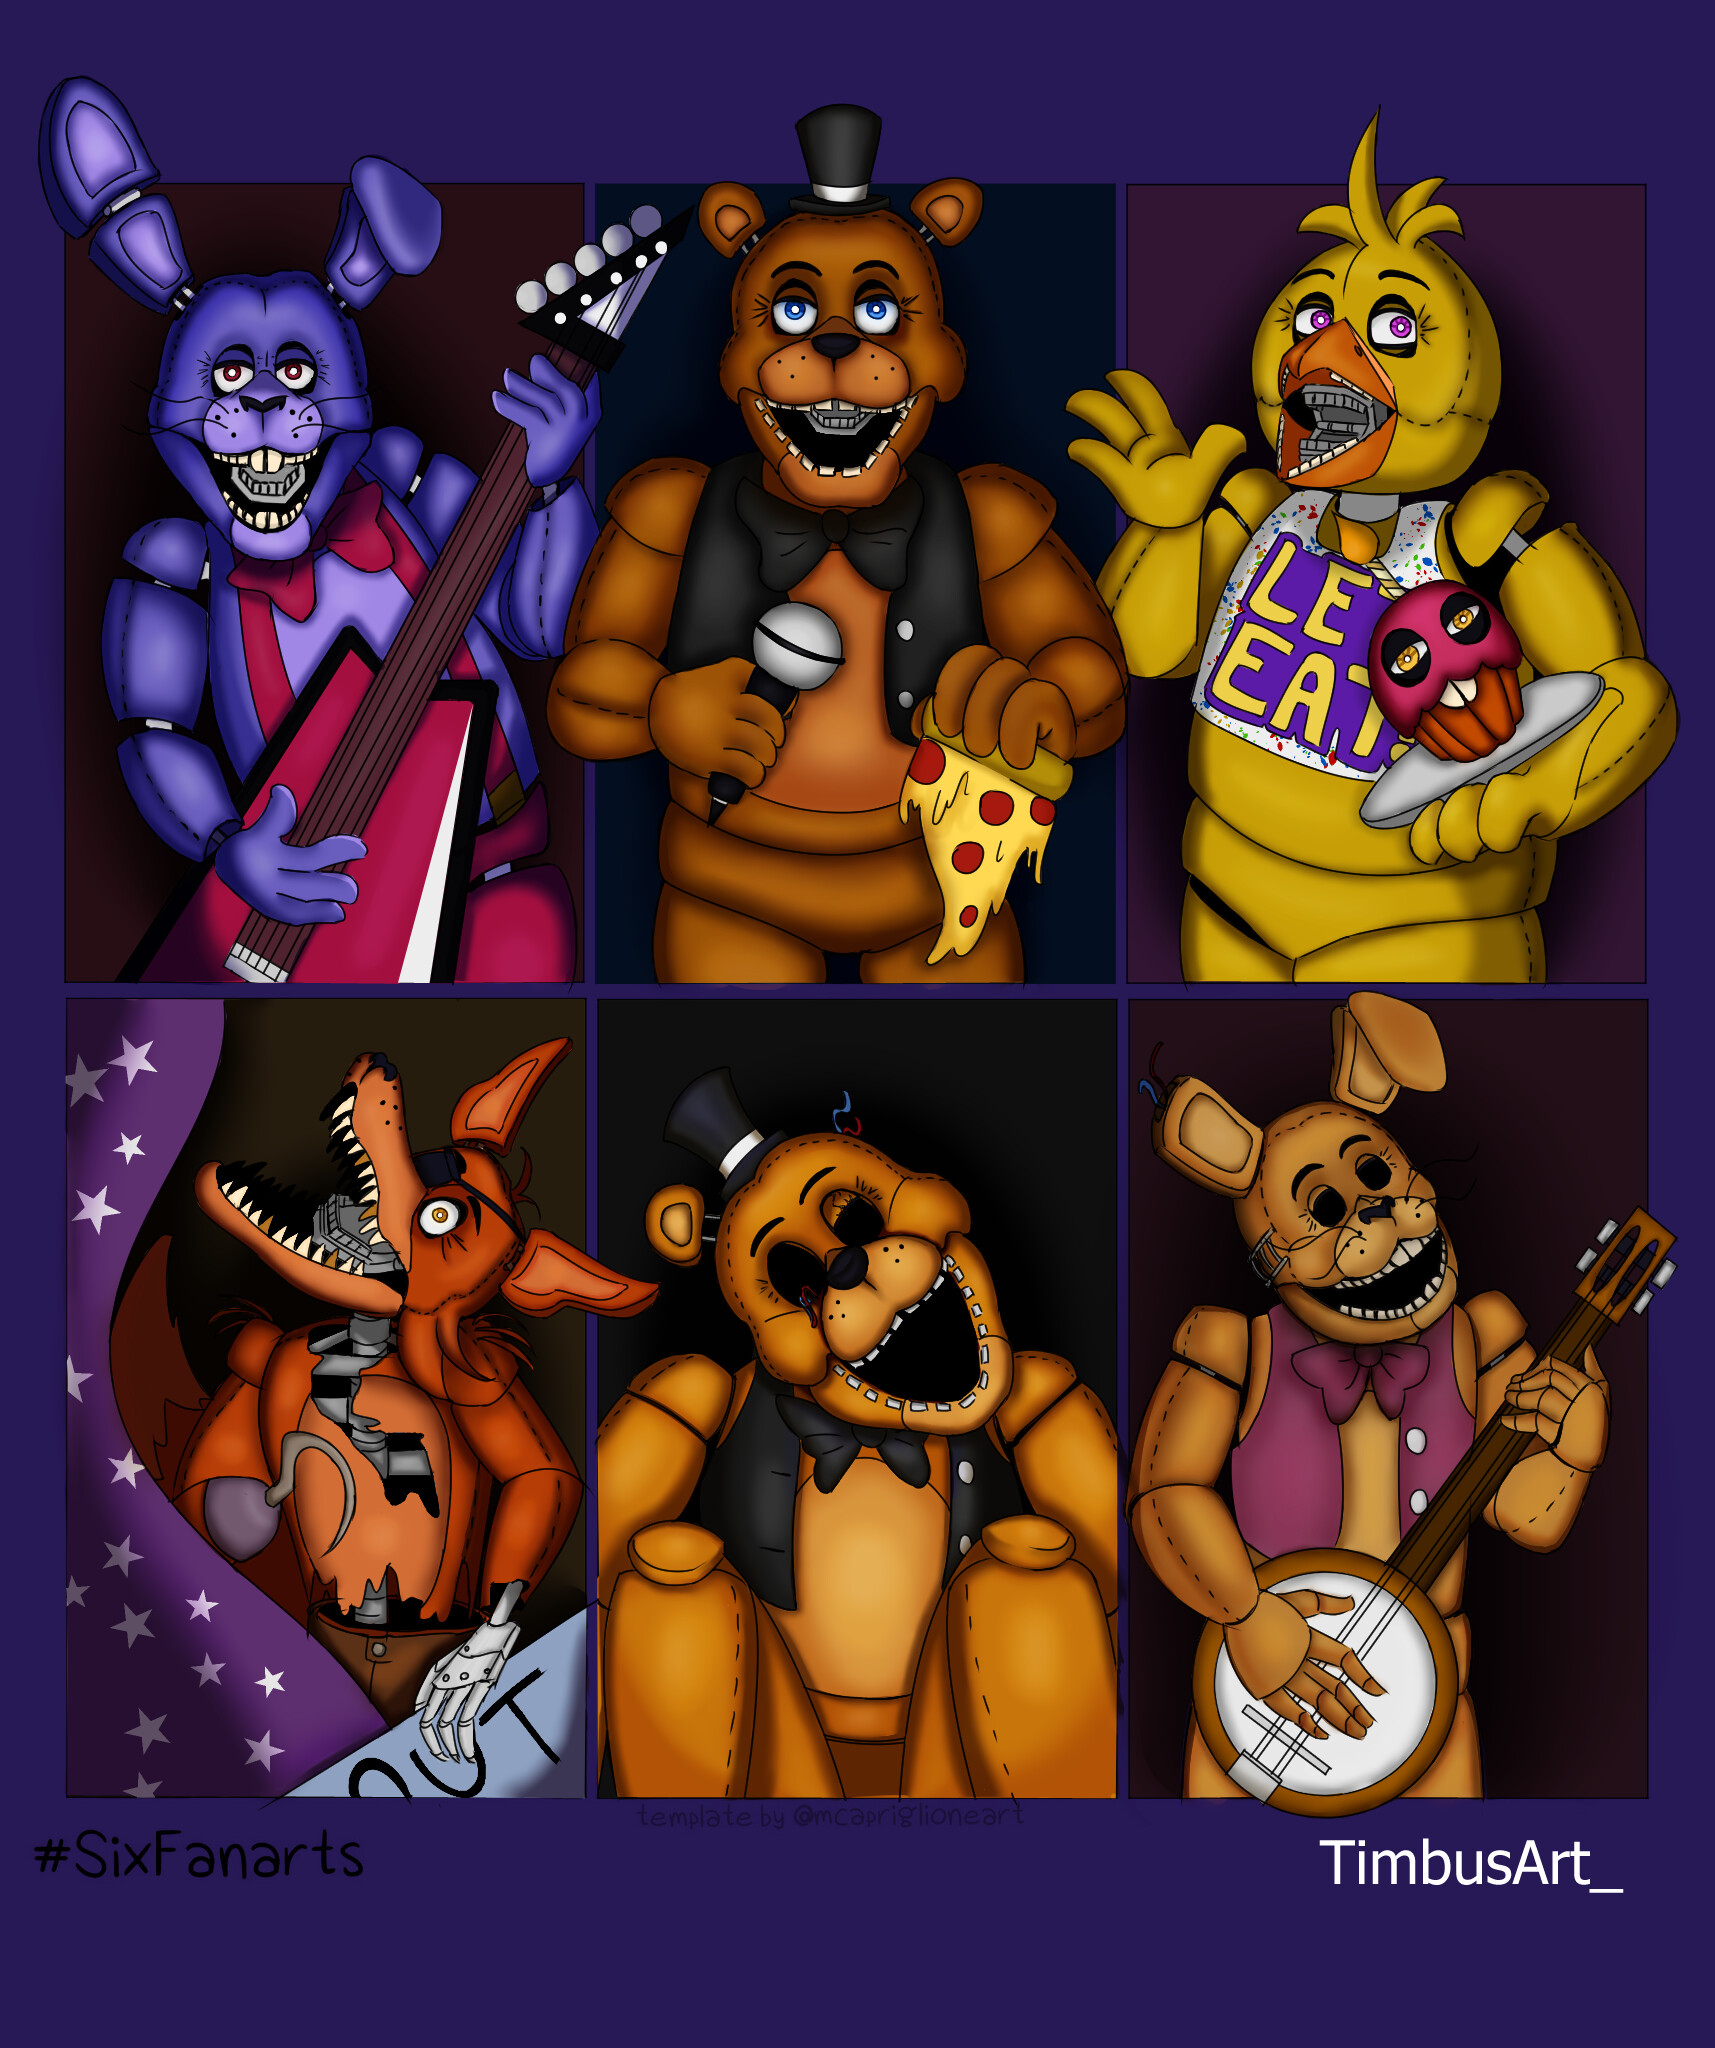 ArtStation - Five Nights At Freddy's Fanmade Movie Poster